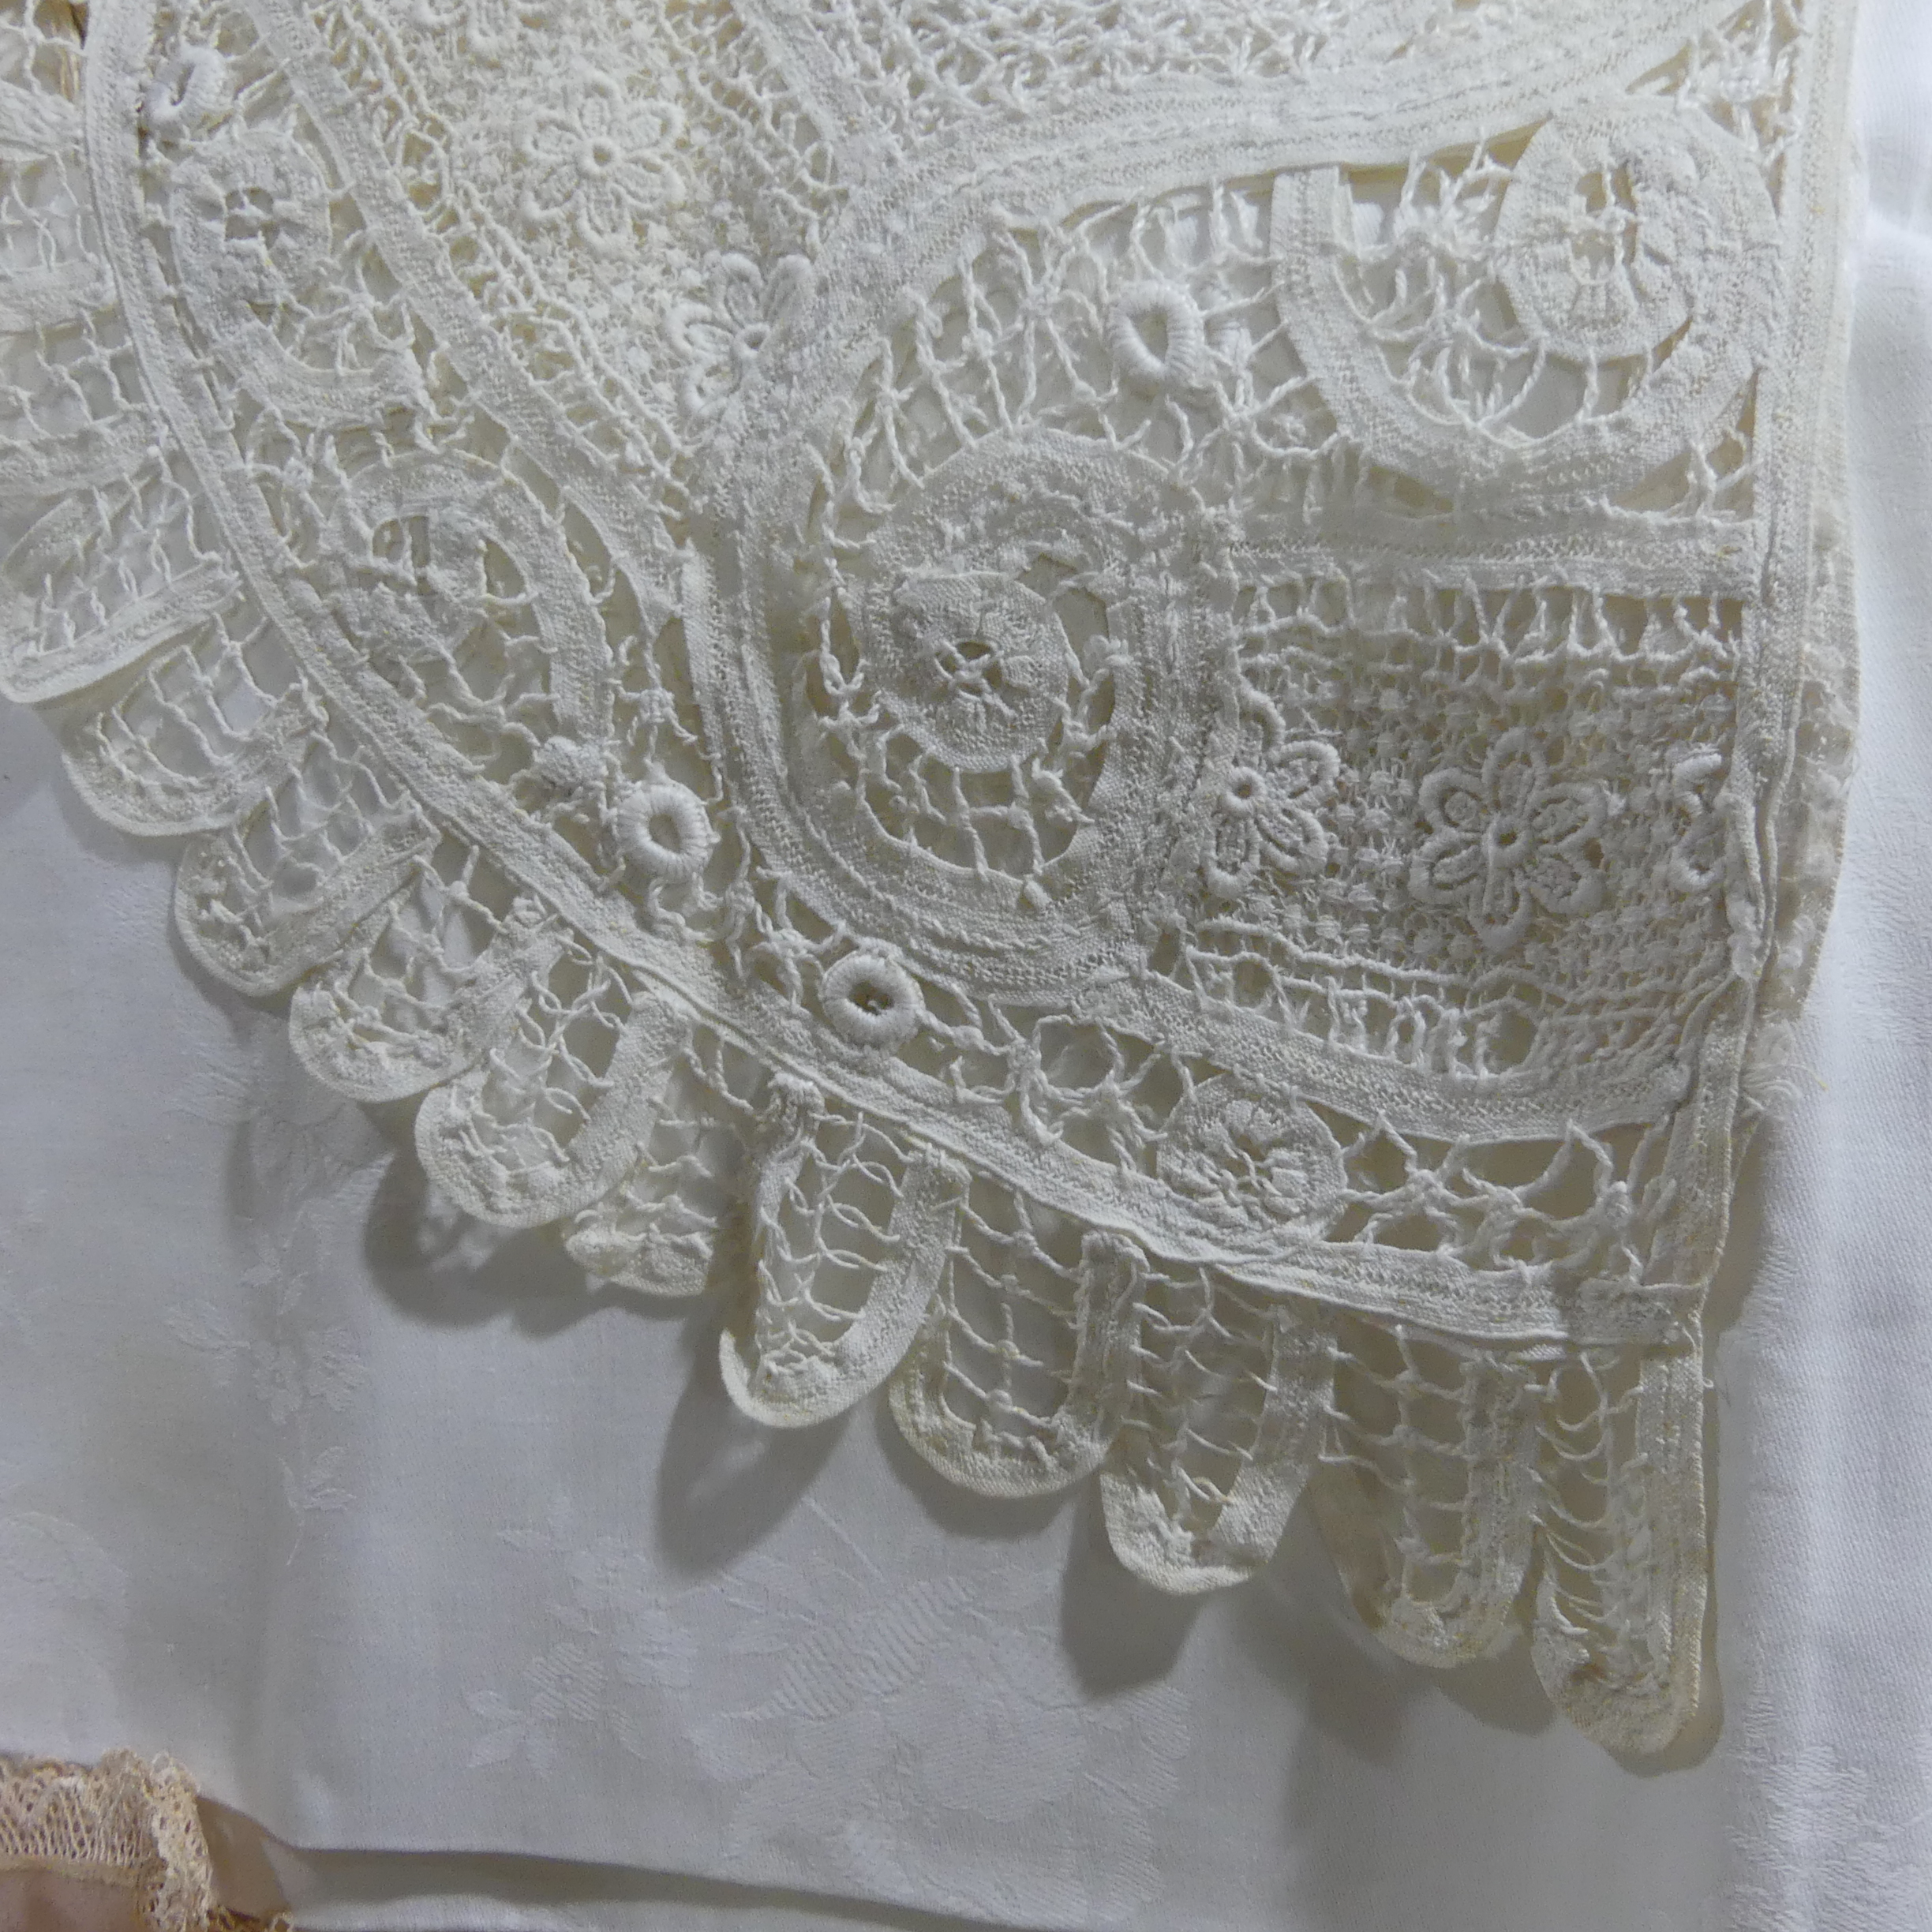 A quantity of Vintage Textiles, including crochet placemats, damask tablecloth, silk - Image 4 of 6